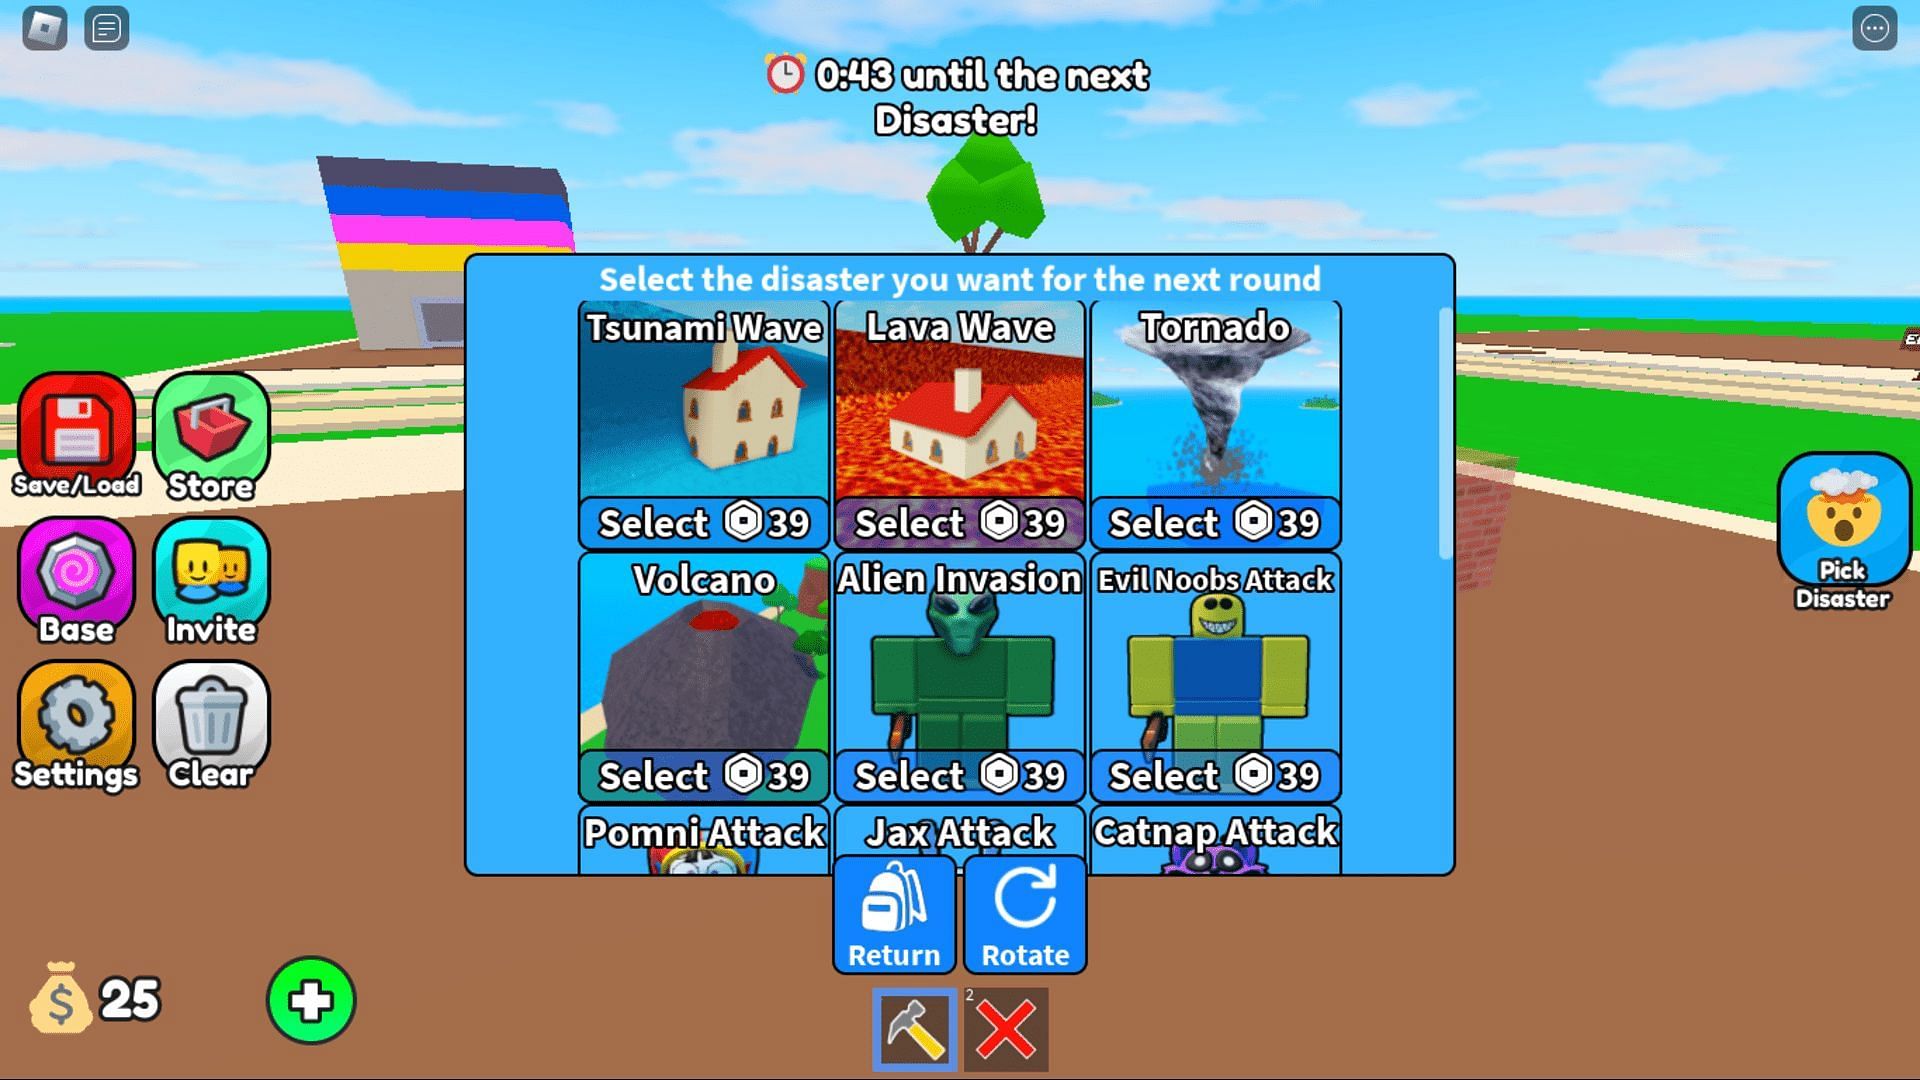 Pick Disaster Menu in Build to Survive the Disasters (Image via Roblox)